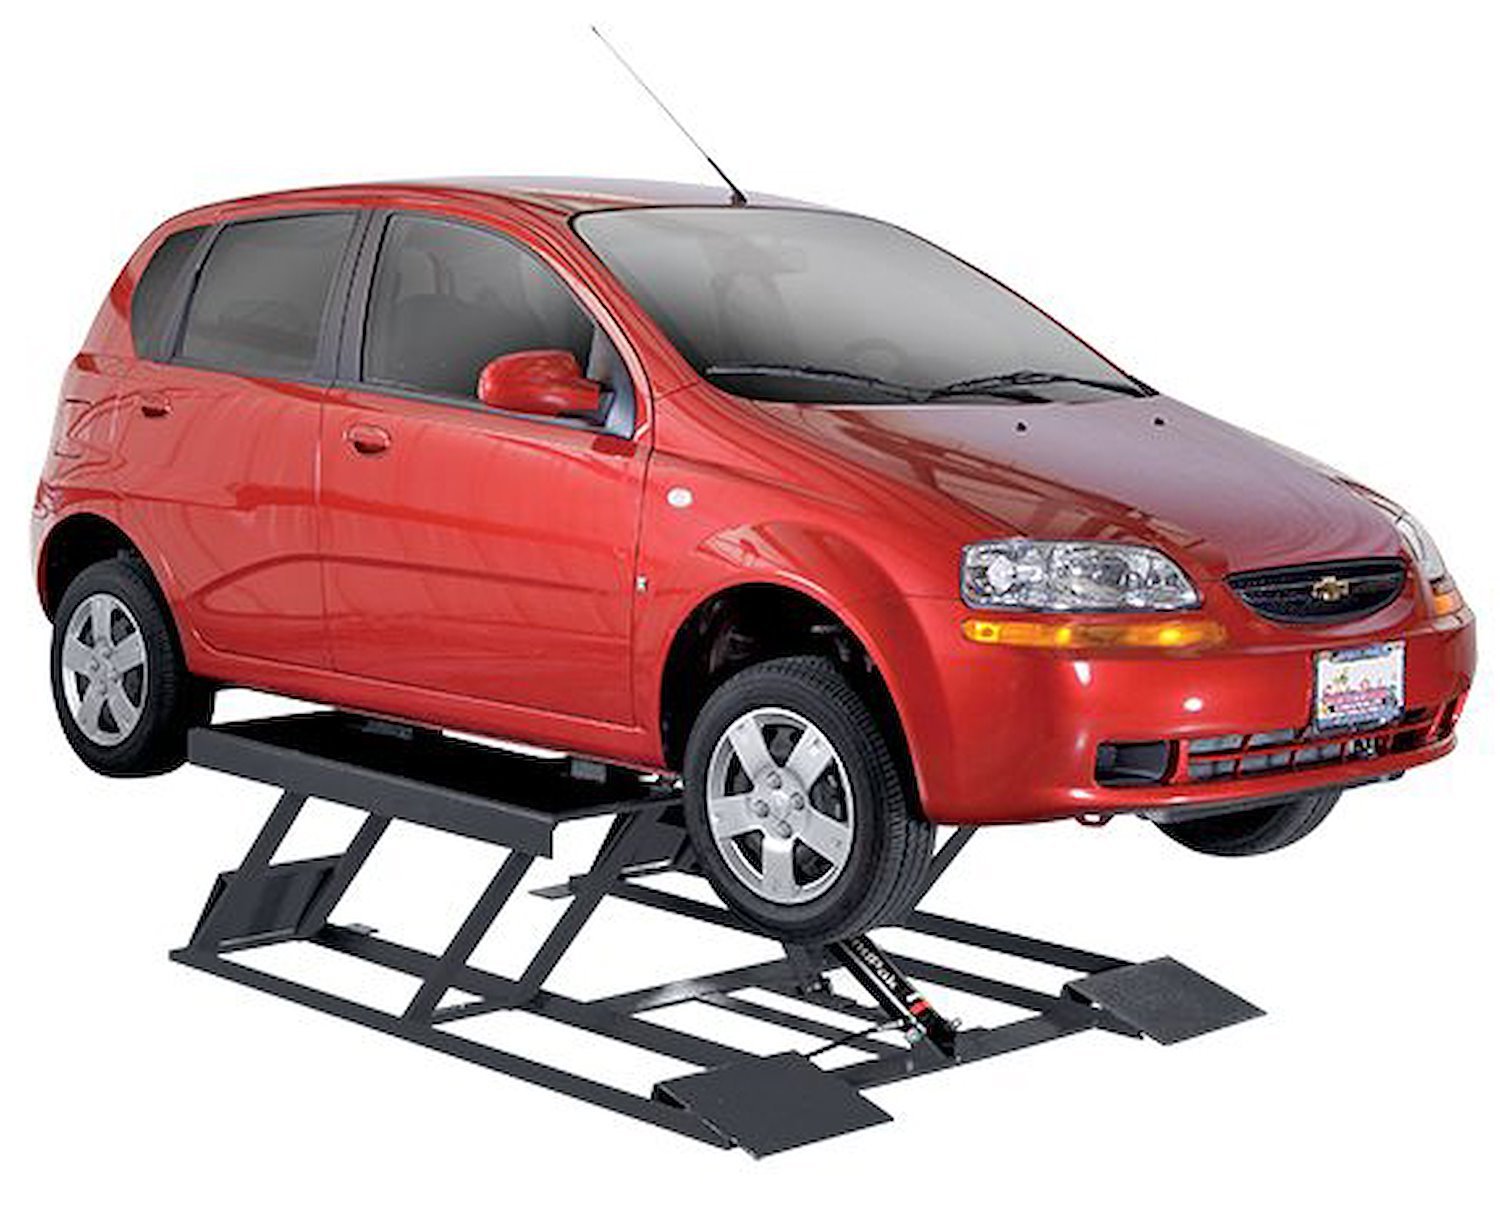 LR-60 Low-Rise Scissor Vehicle Lift, 6,000 lbs. Capacity, 26 in. Max Rise